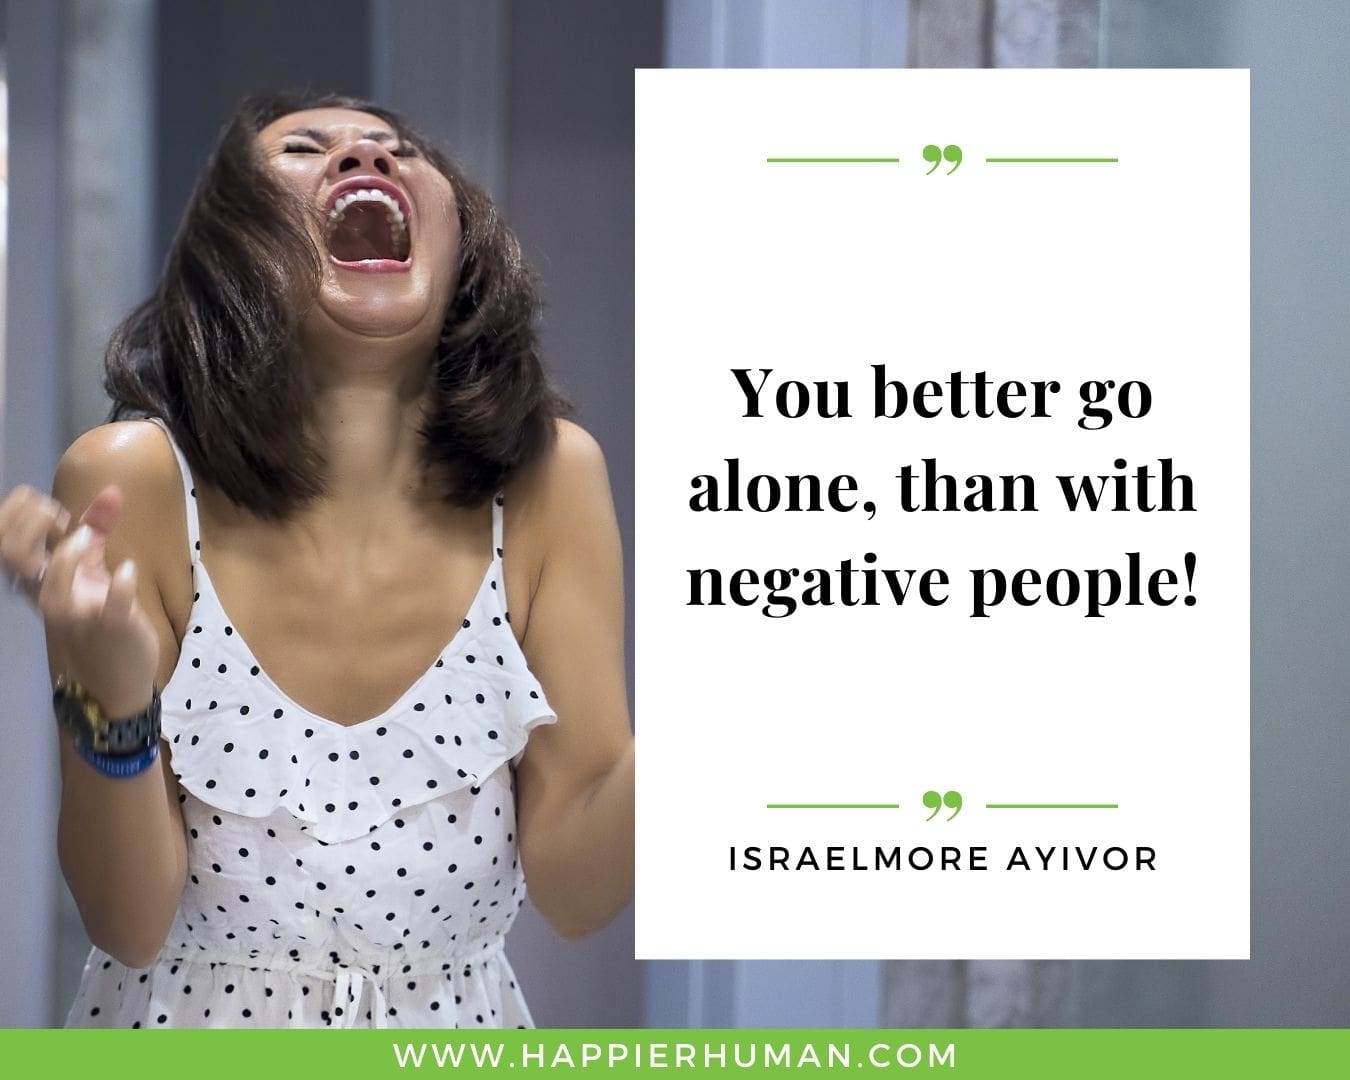 Haters Quotes - “You better go alone, than with negative people!” - Israelmore Ayivor